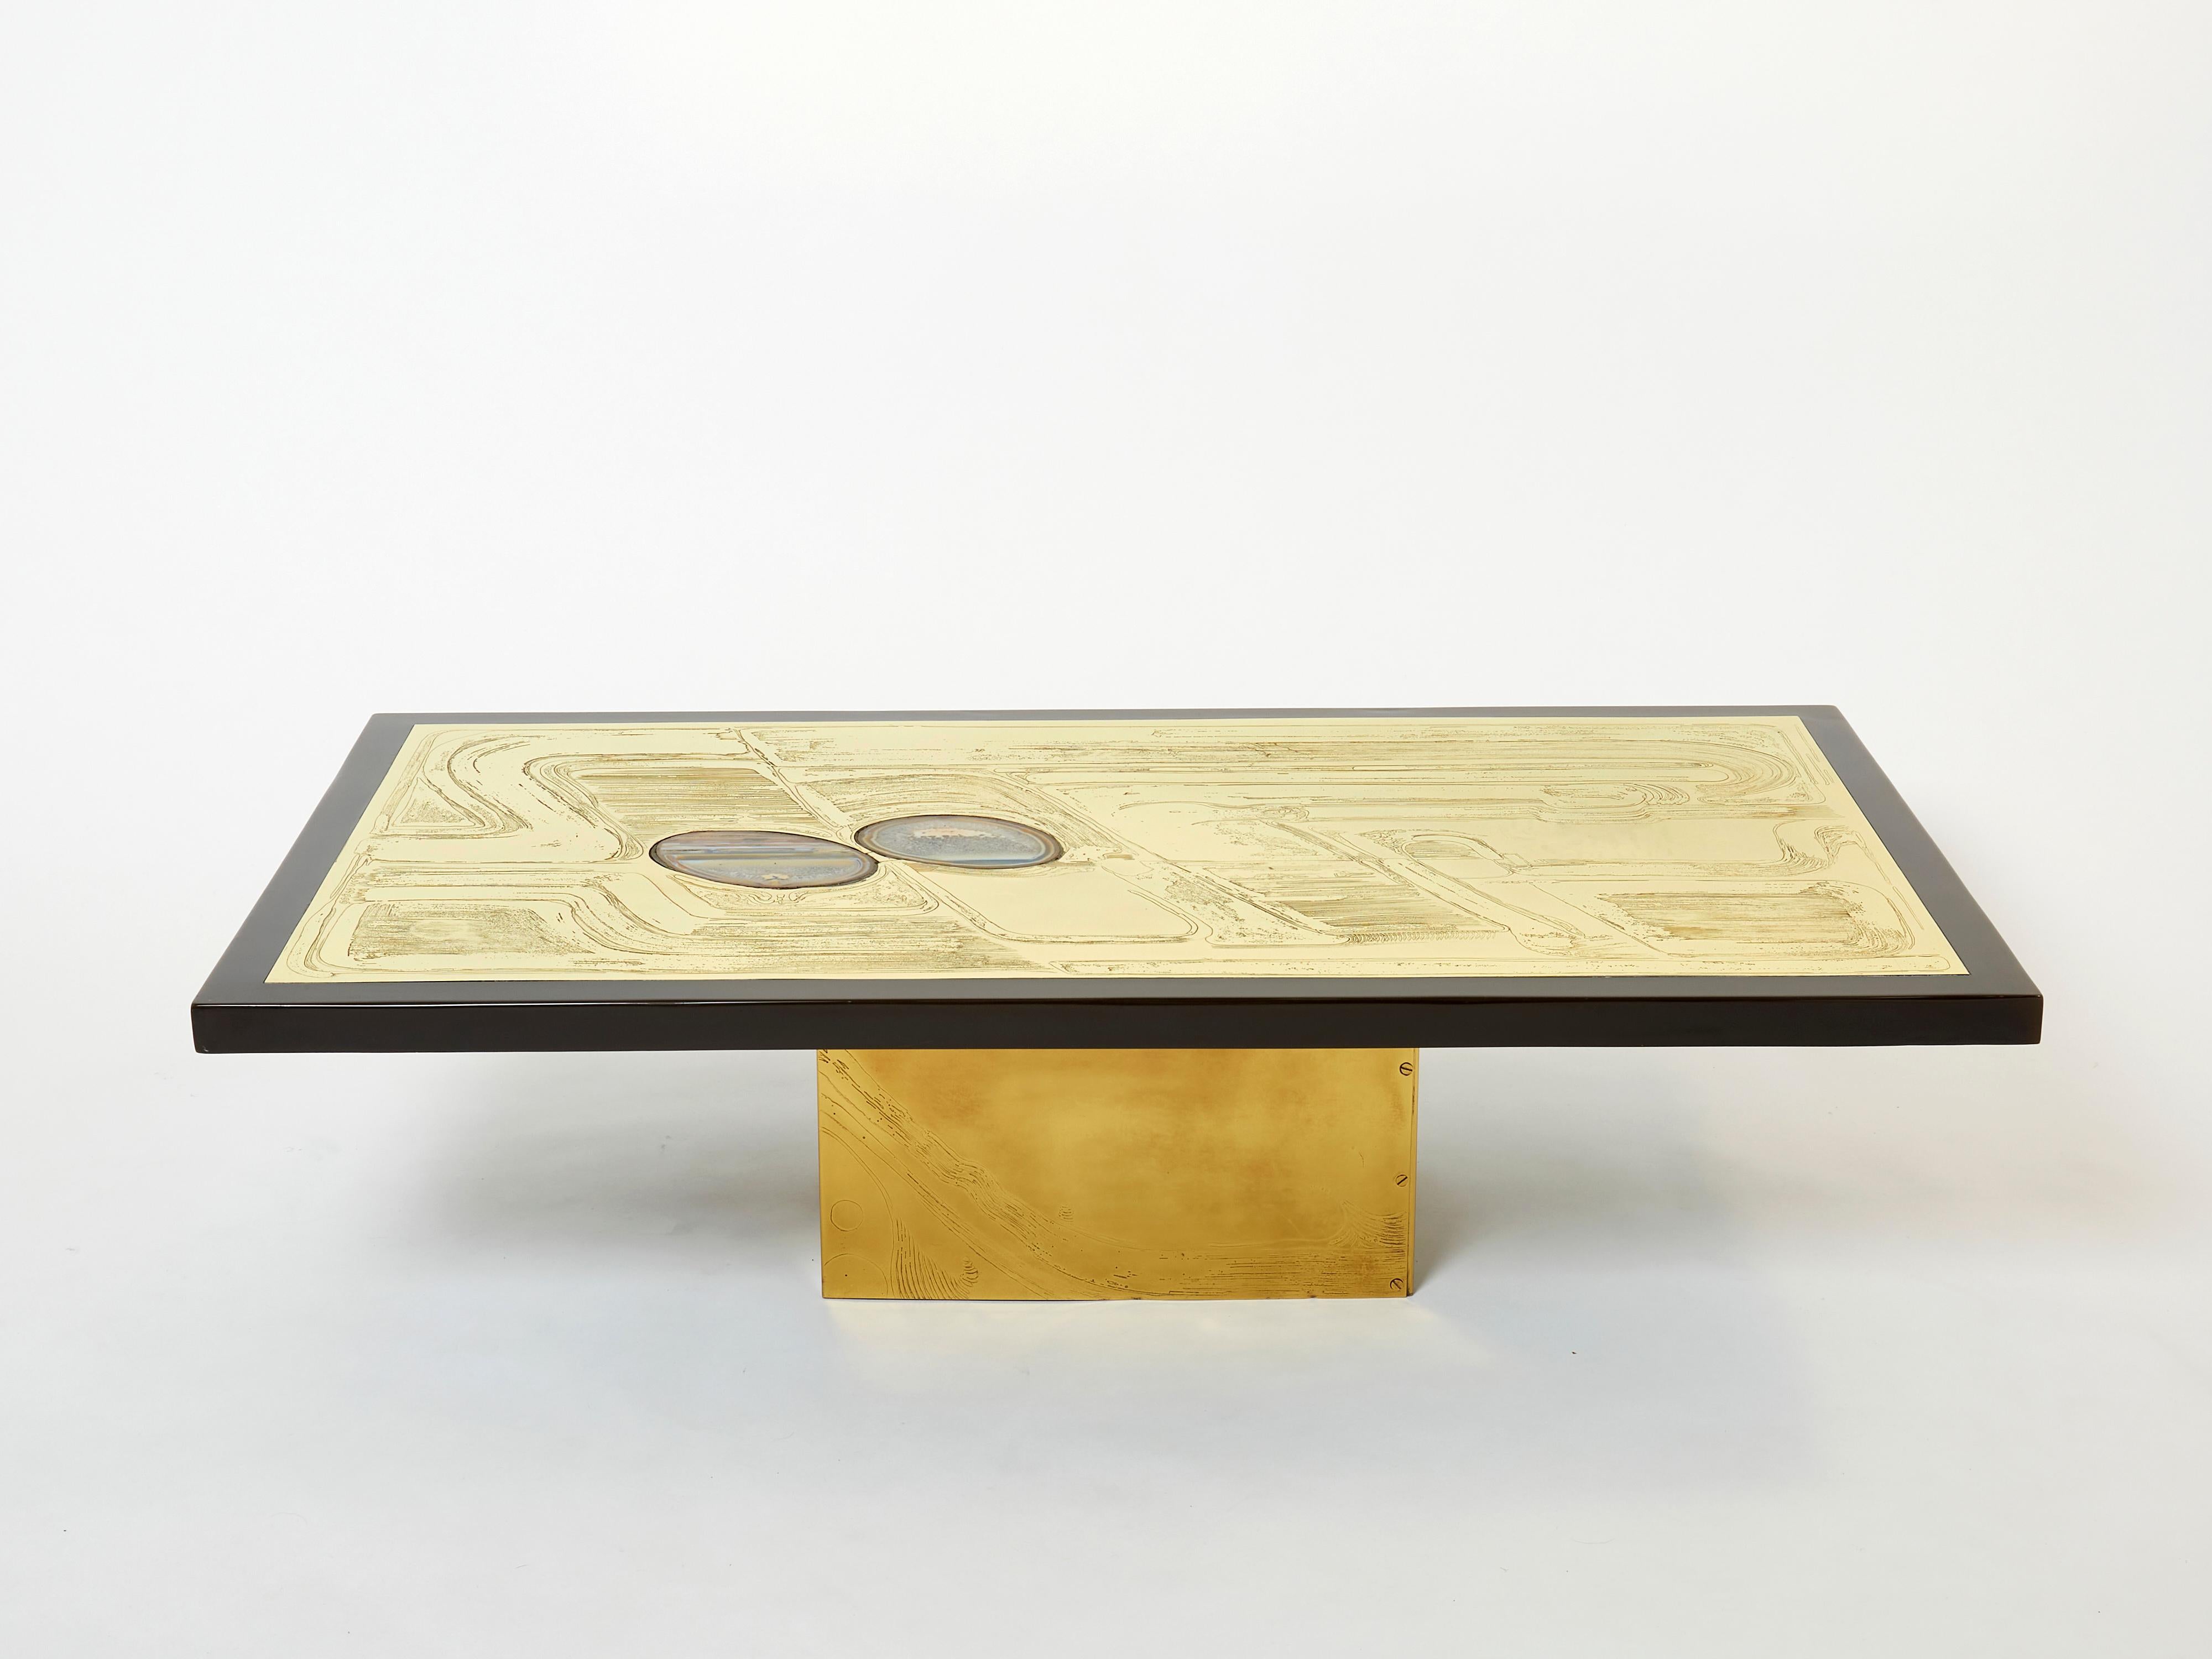 Christian Krekels Signed Belgian Etched Brass Agate Coffee Table, 1979 For Sale 9